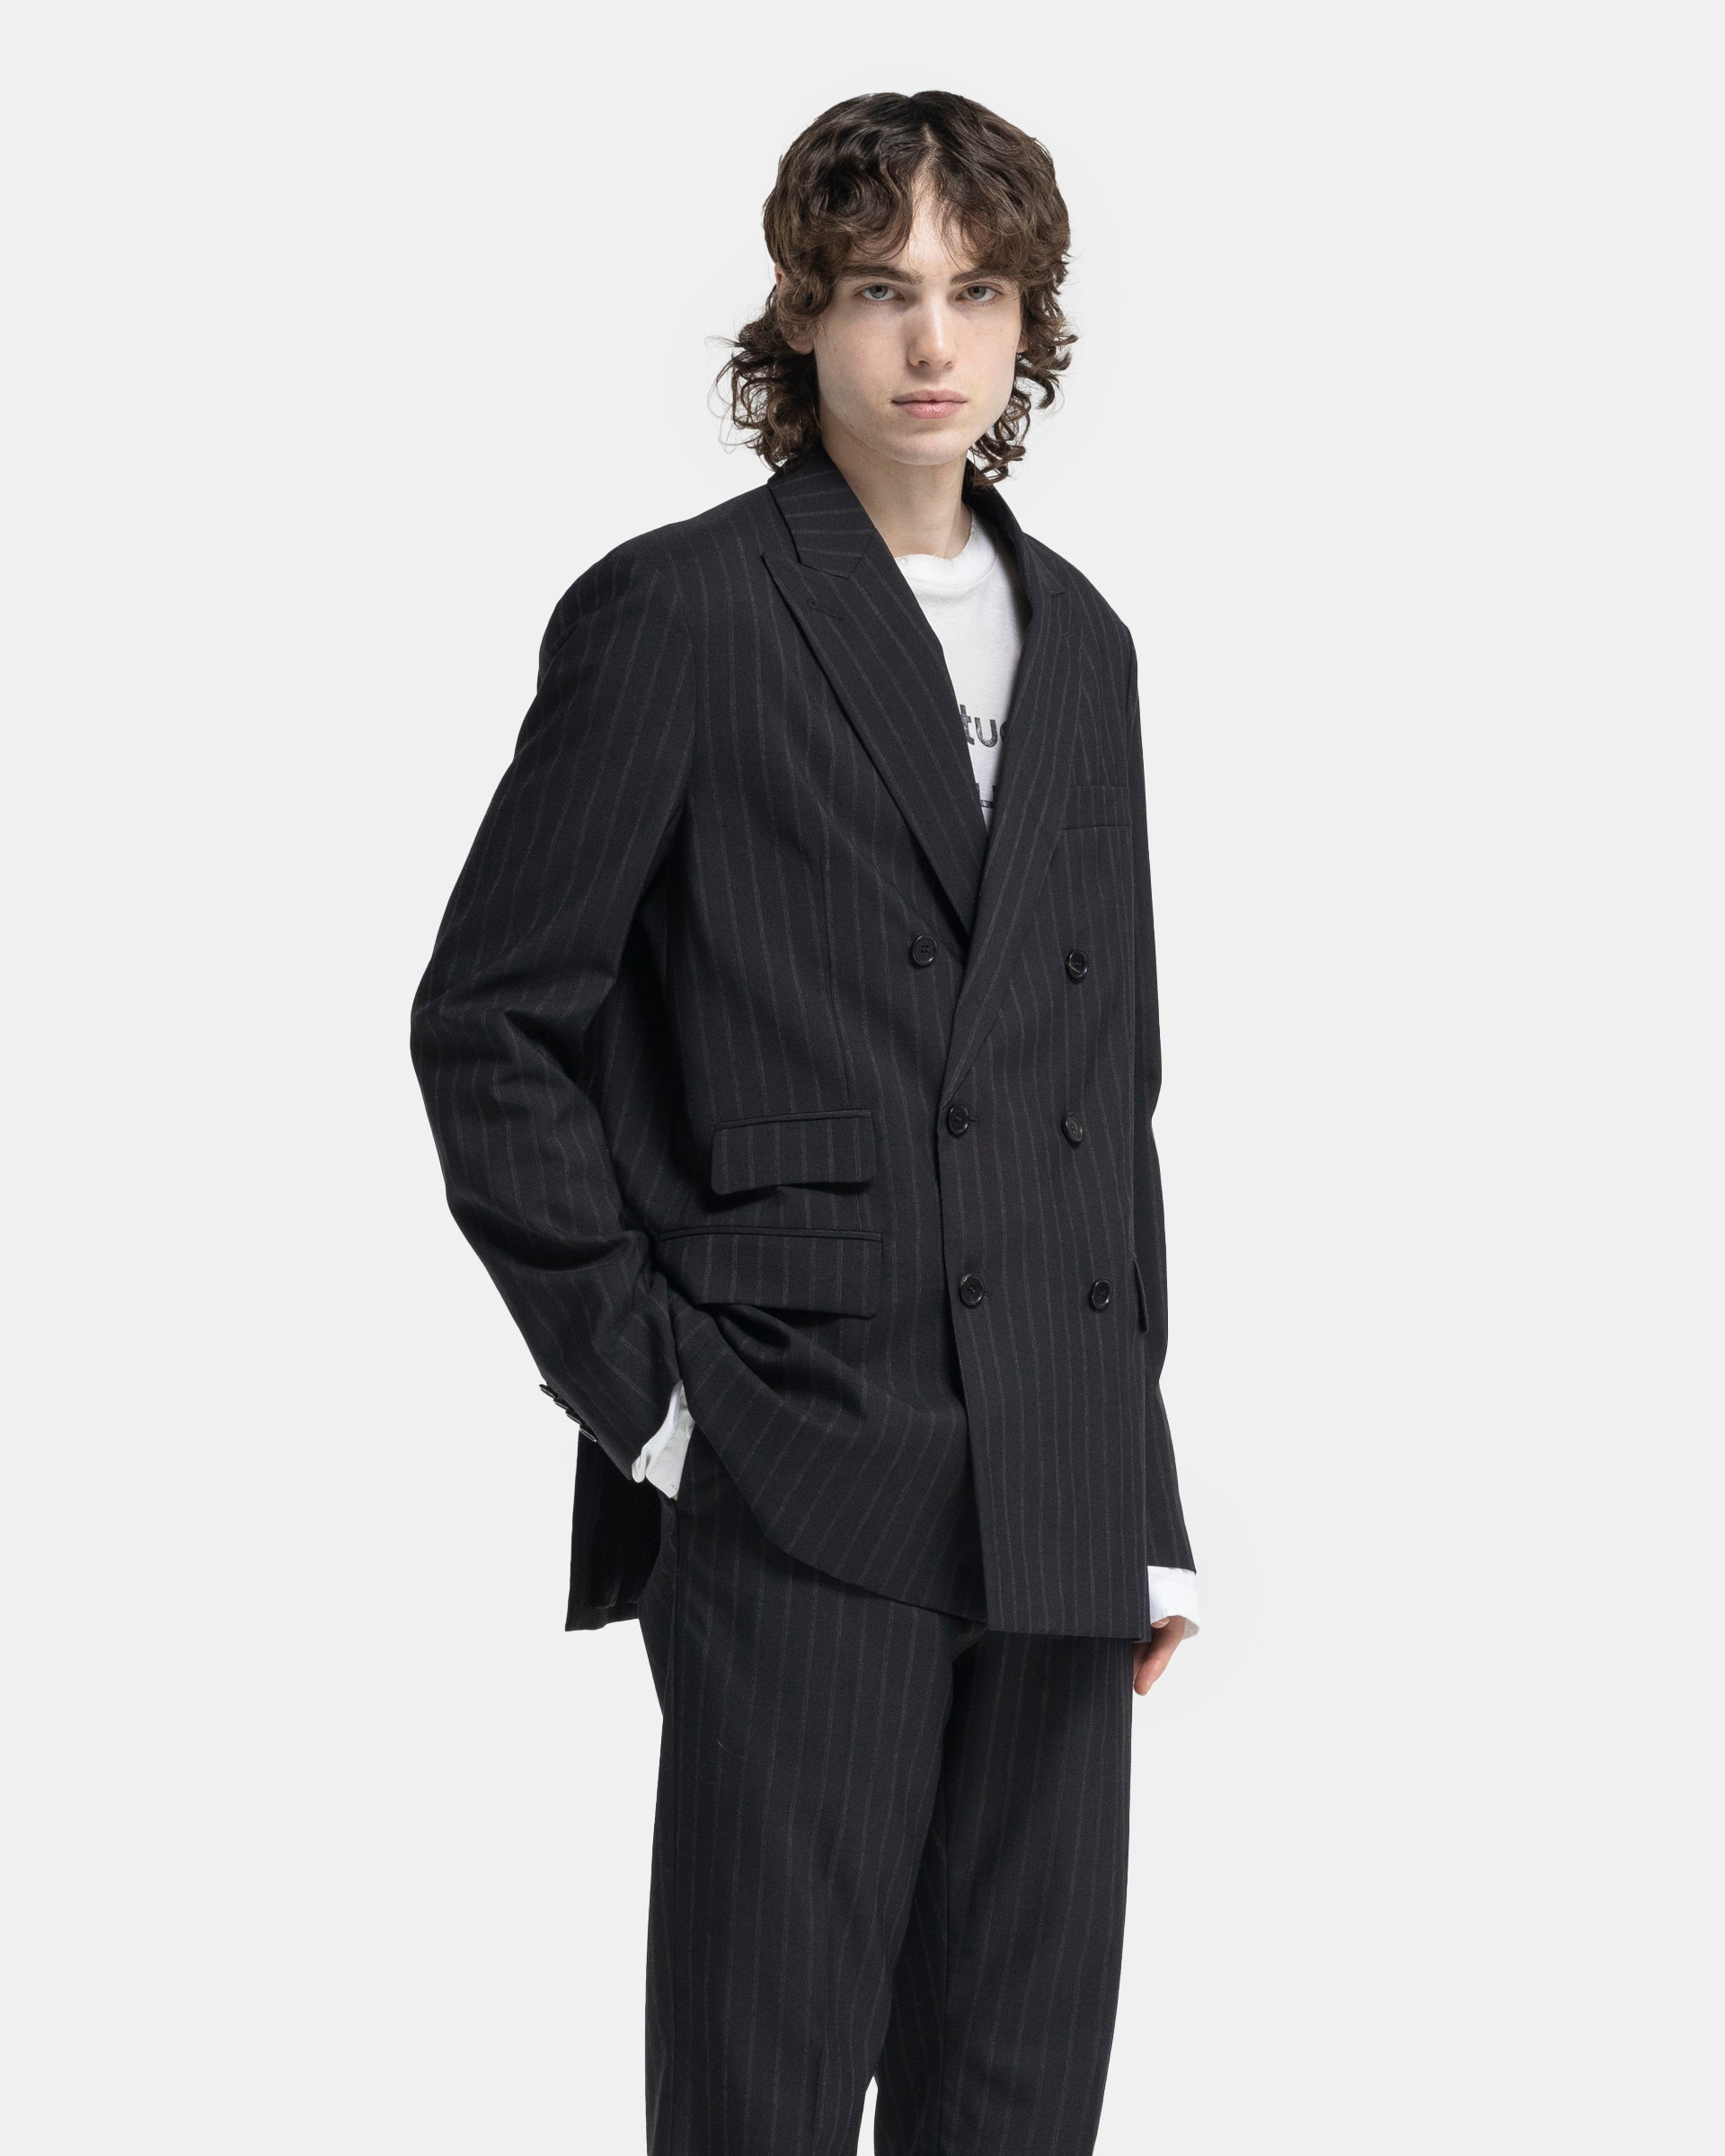 Tailored Suit Jacket in Black & Grey